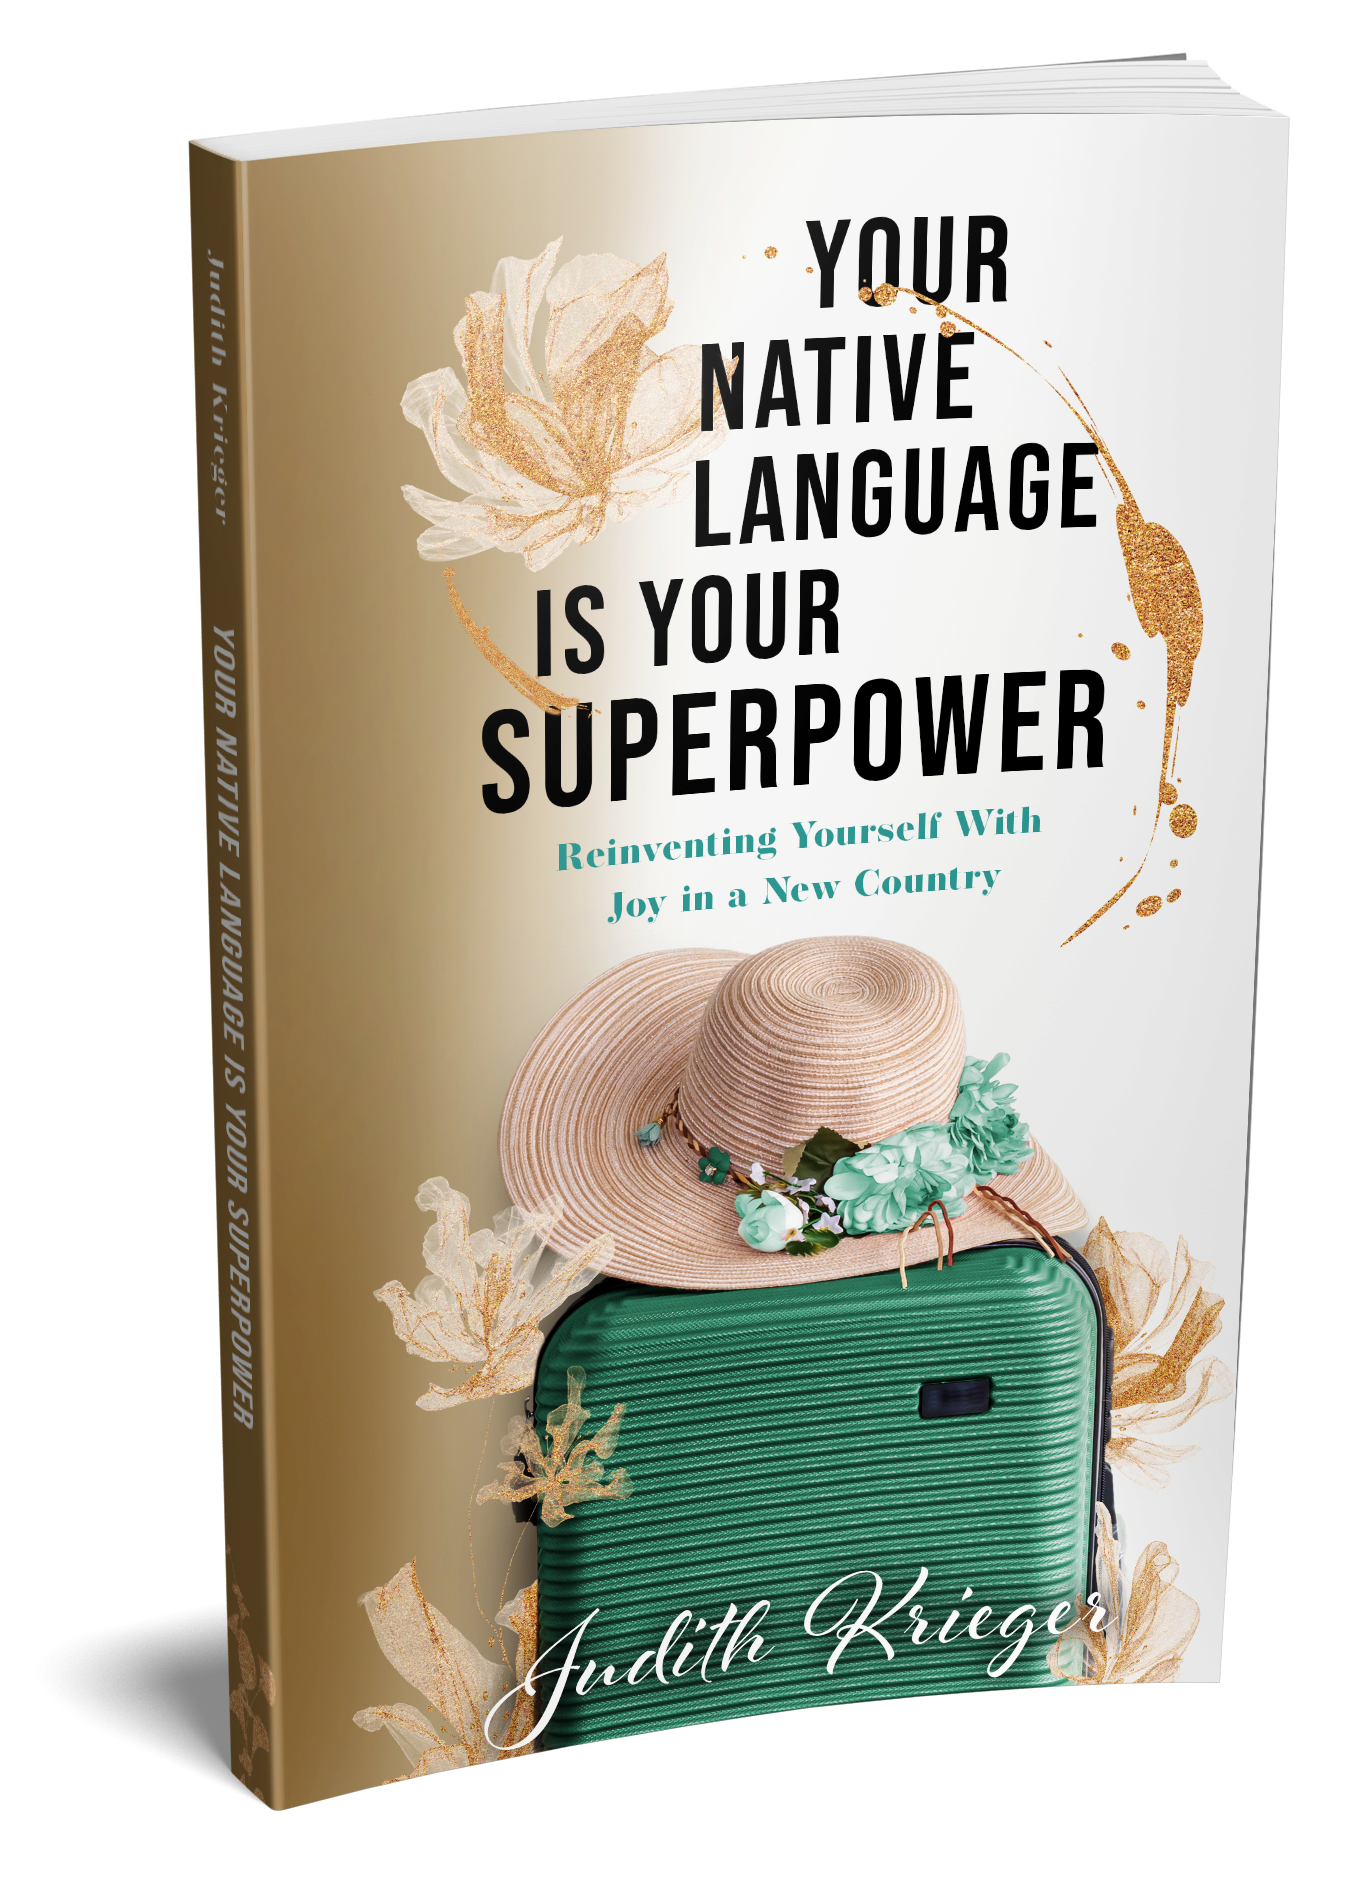 your native language is your superpower book for immigrants image